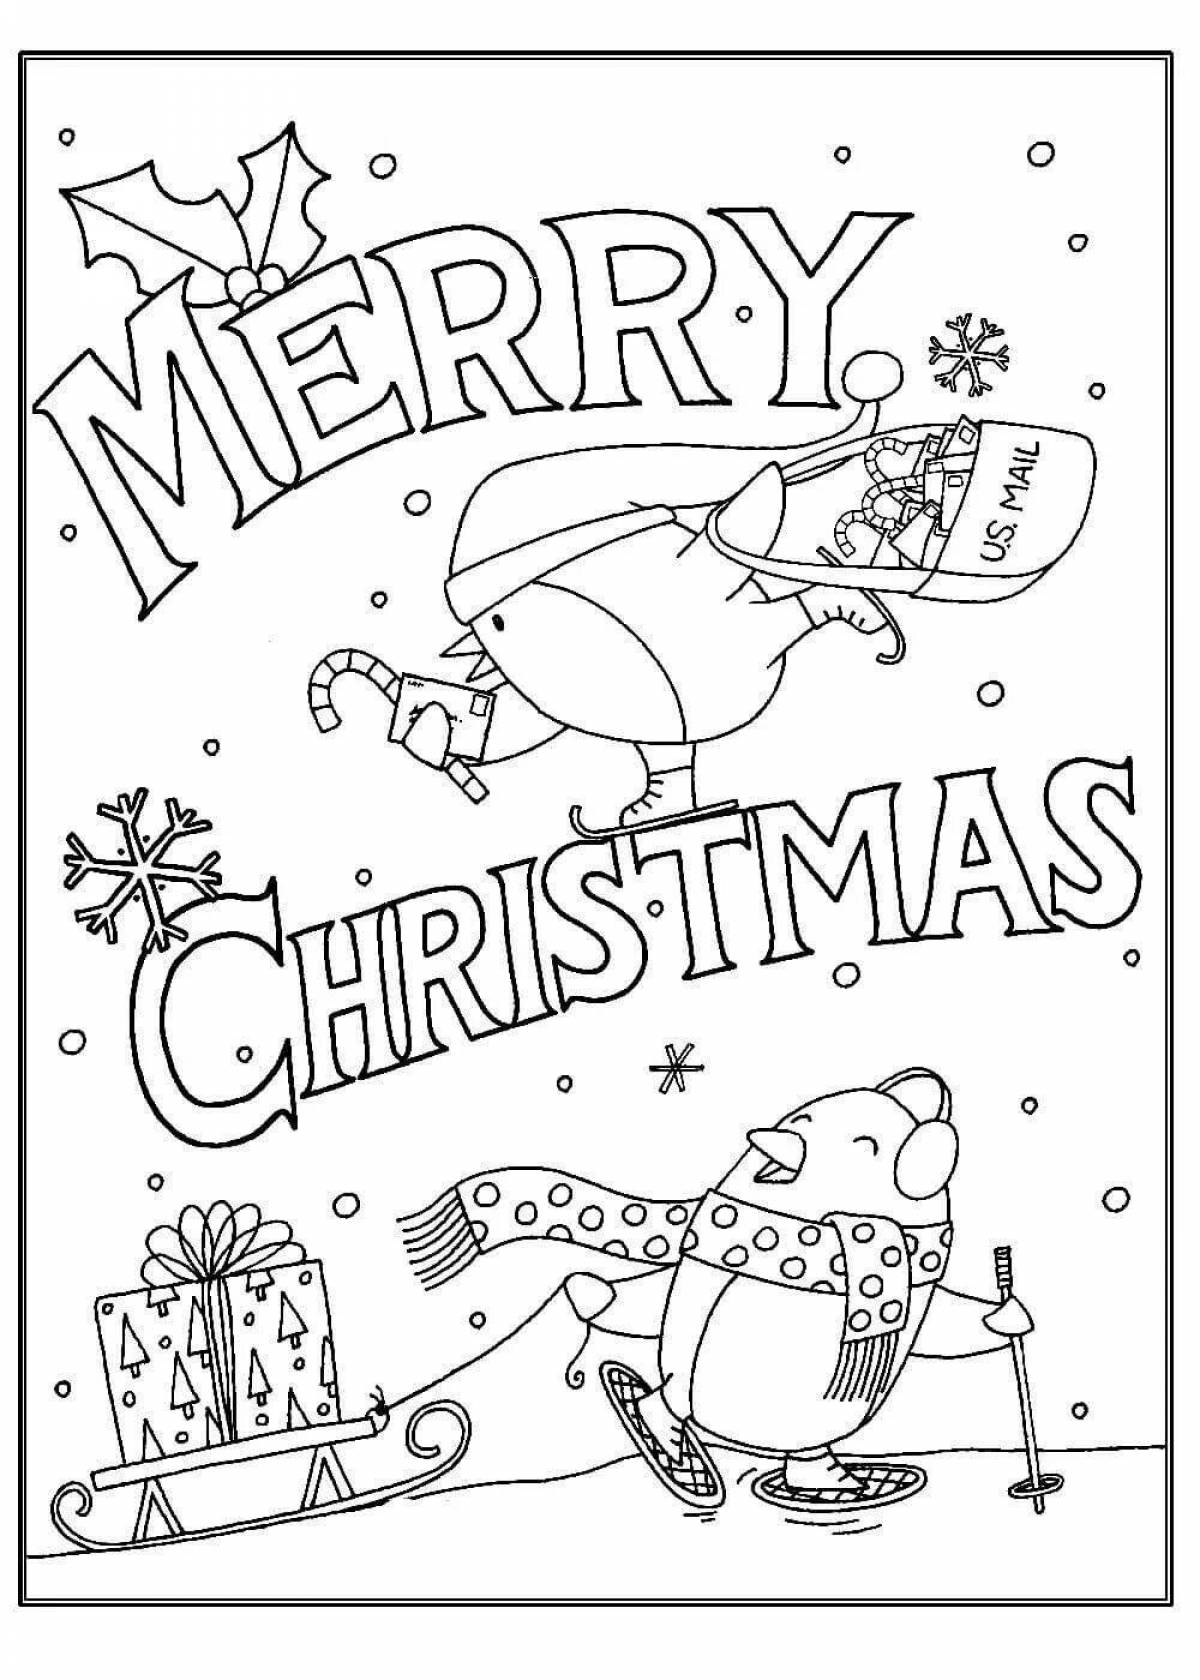 Dazzling merry christmas coloring book